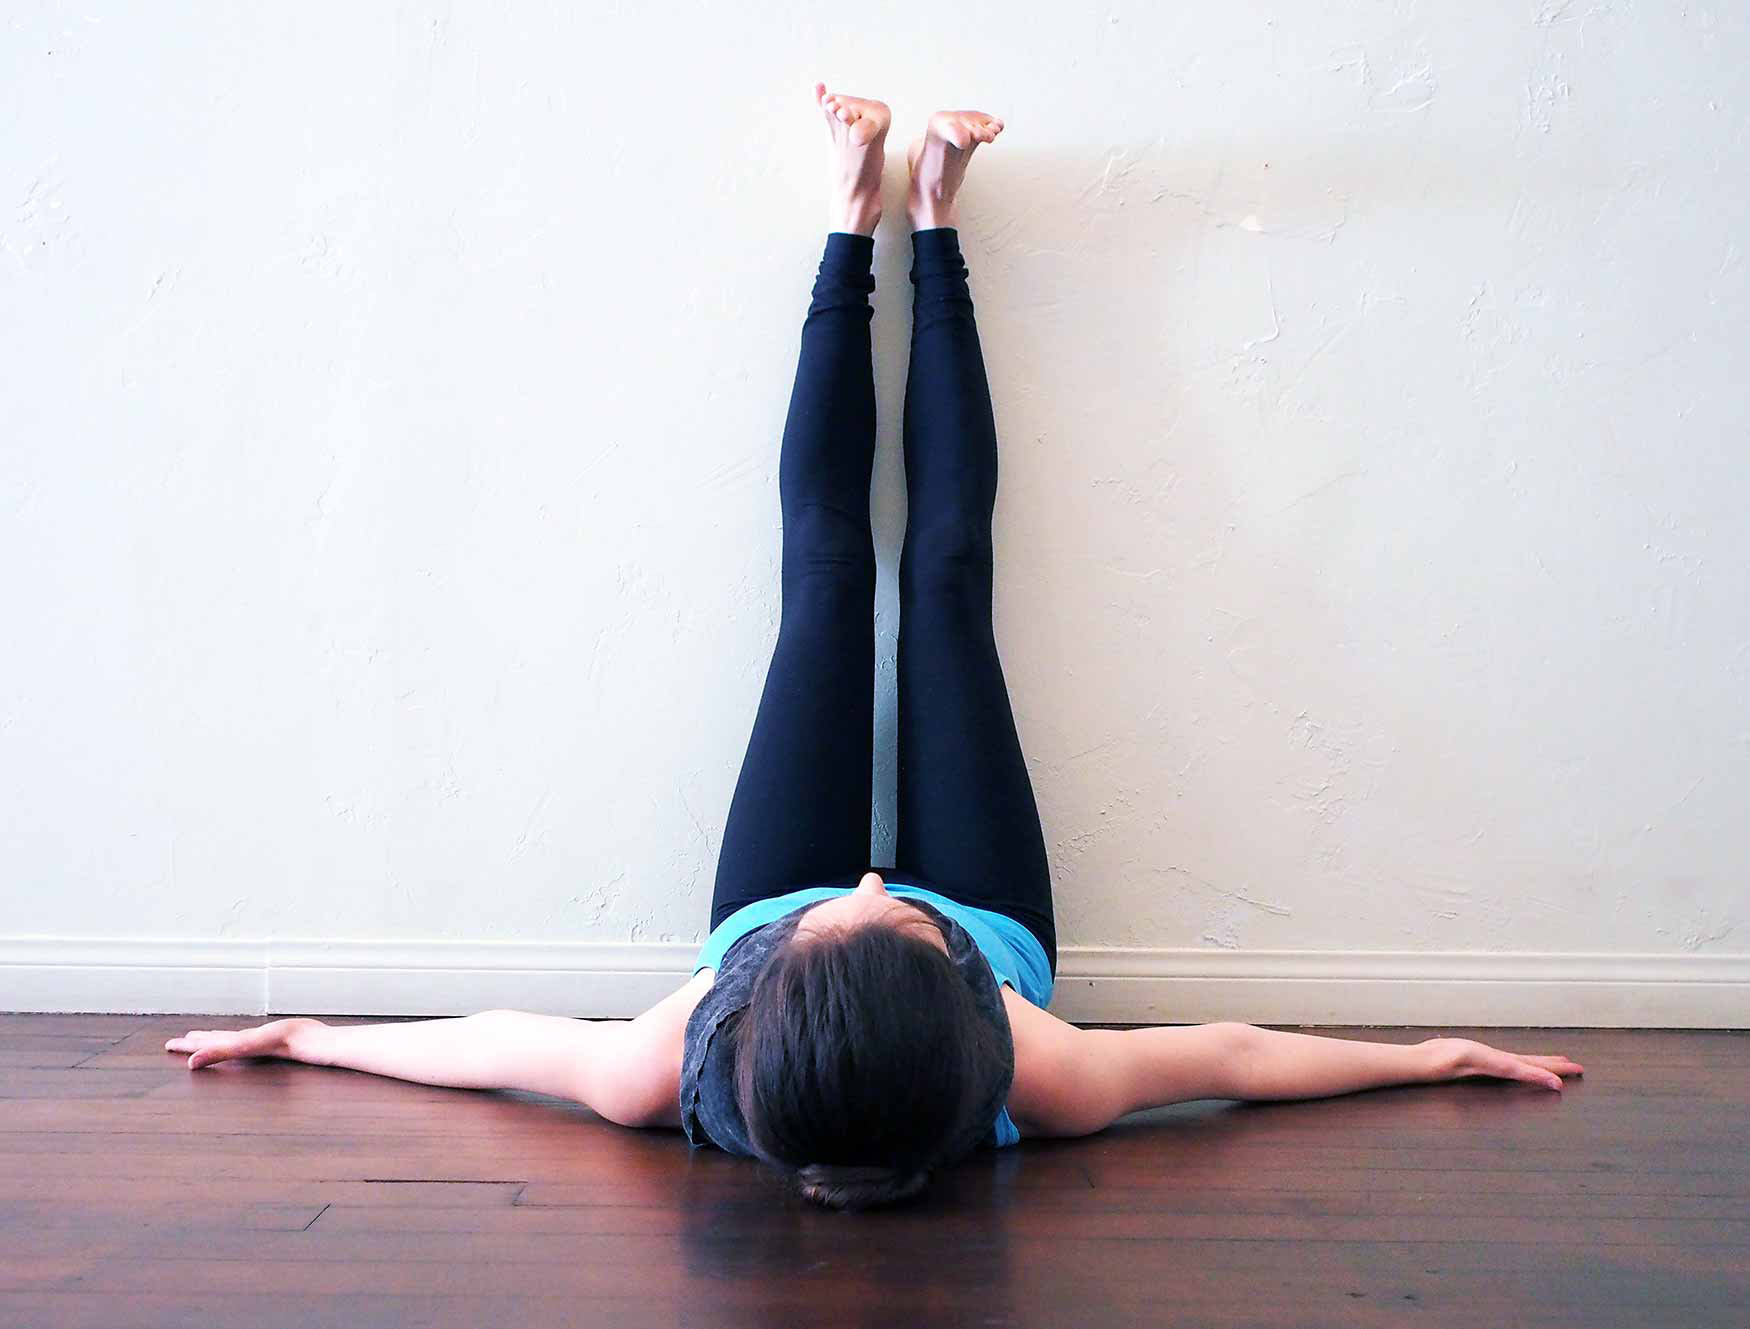 8 Yoga Poses To Cool Down This Summer - Benefits